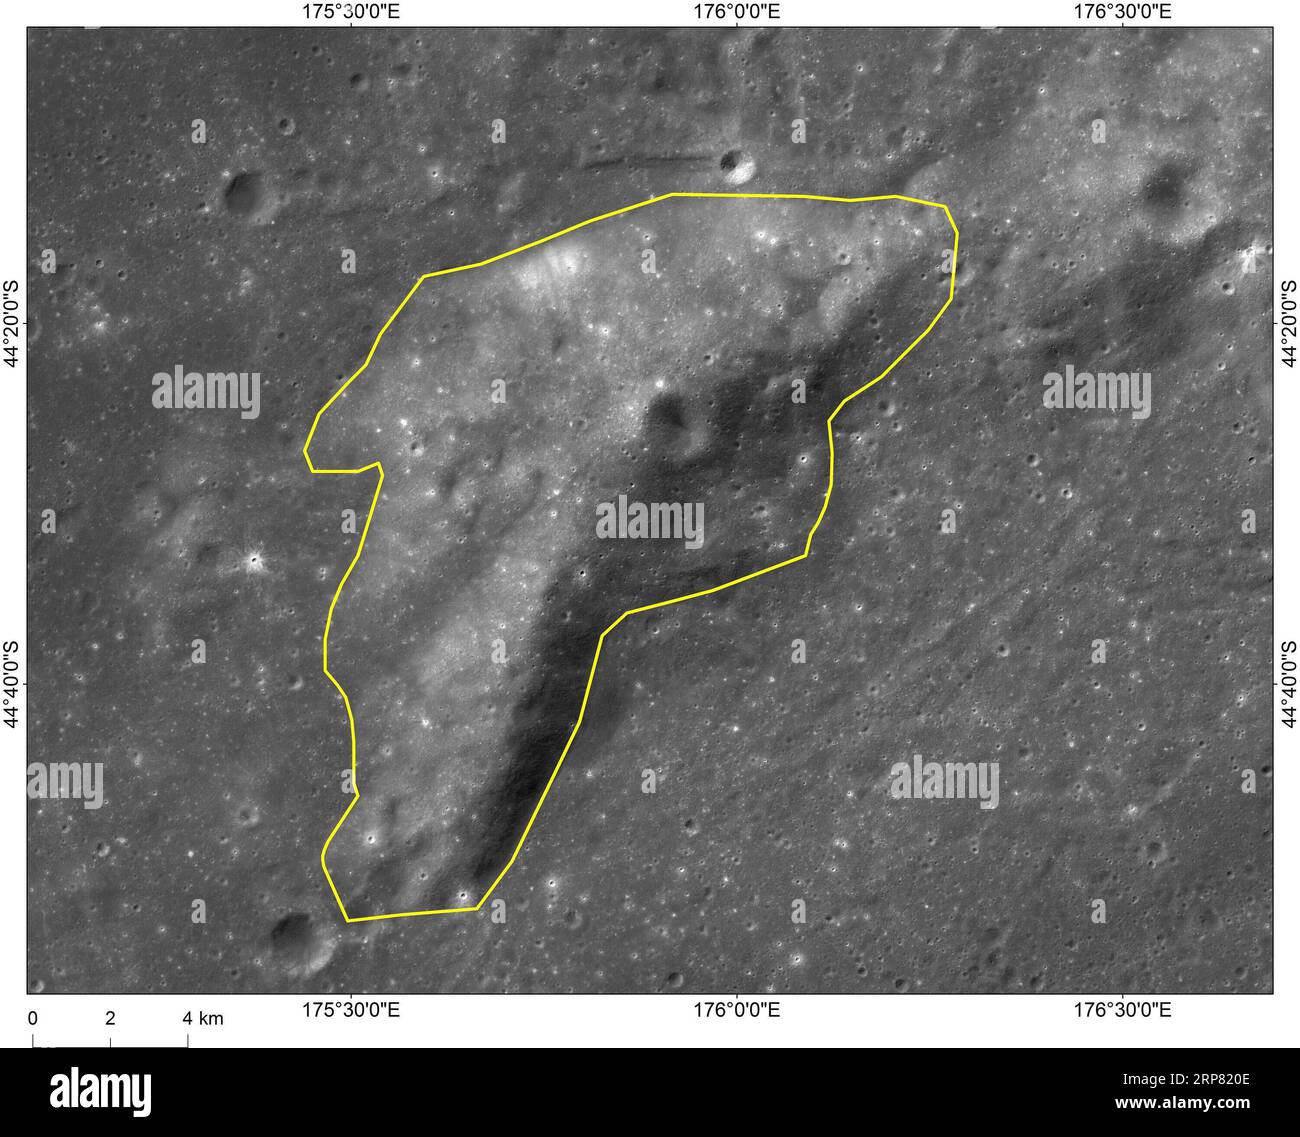 (190215) -- BEIJING, Feb. 15, 2019 (Xinhua) -- Photo provided by the China National Space Administration (CNSA) shows the image of Mons Tai, a hill near Statio Tianhe , the landing site of China s Chang e-4 lunar probe. The landing site of China s Chang e-4 lunar probe has been named Statio Tianhe after the spacecraft made the first-ever soft landing on the far side of the moon last month. Together with three nearby impact craters and one hill, the name was approved by the International Astronomical Union (IAU), Liu Jizhong, director of the China Lunar Exploration and Space Engineering Center Stock Photo